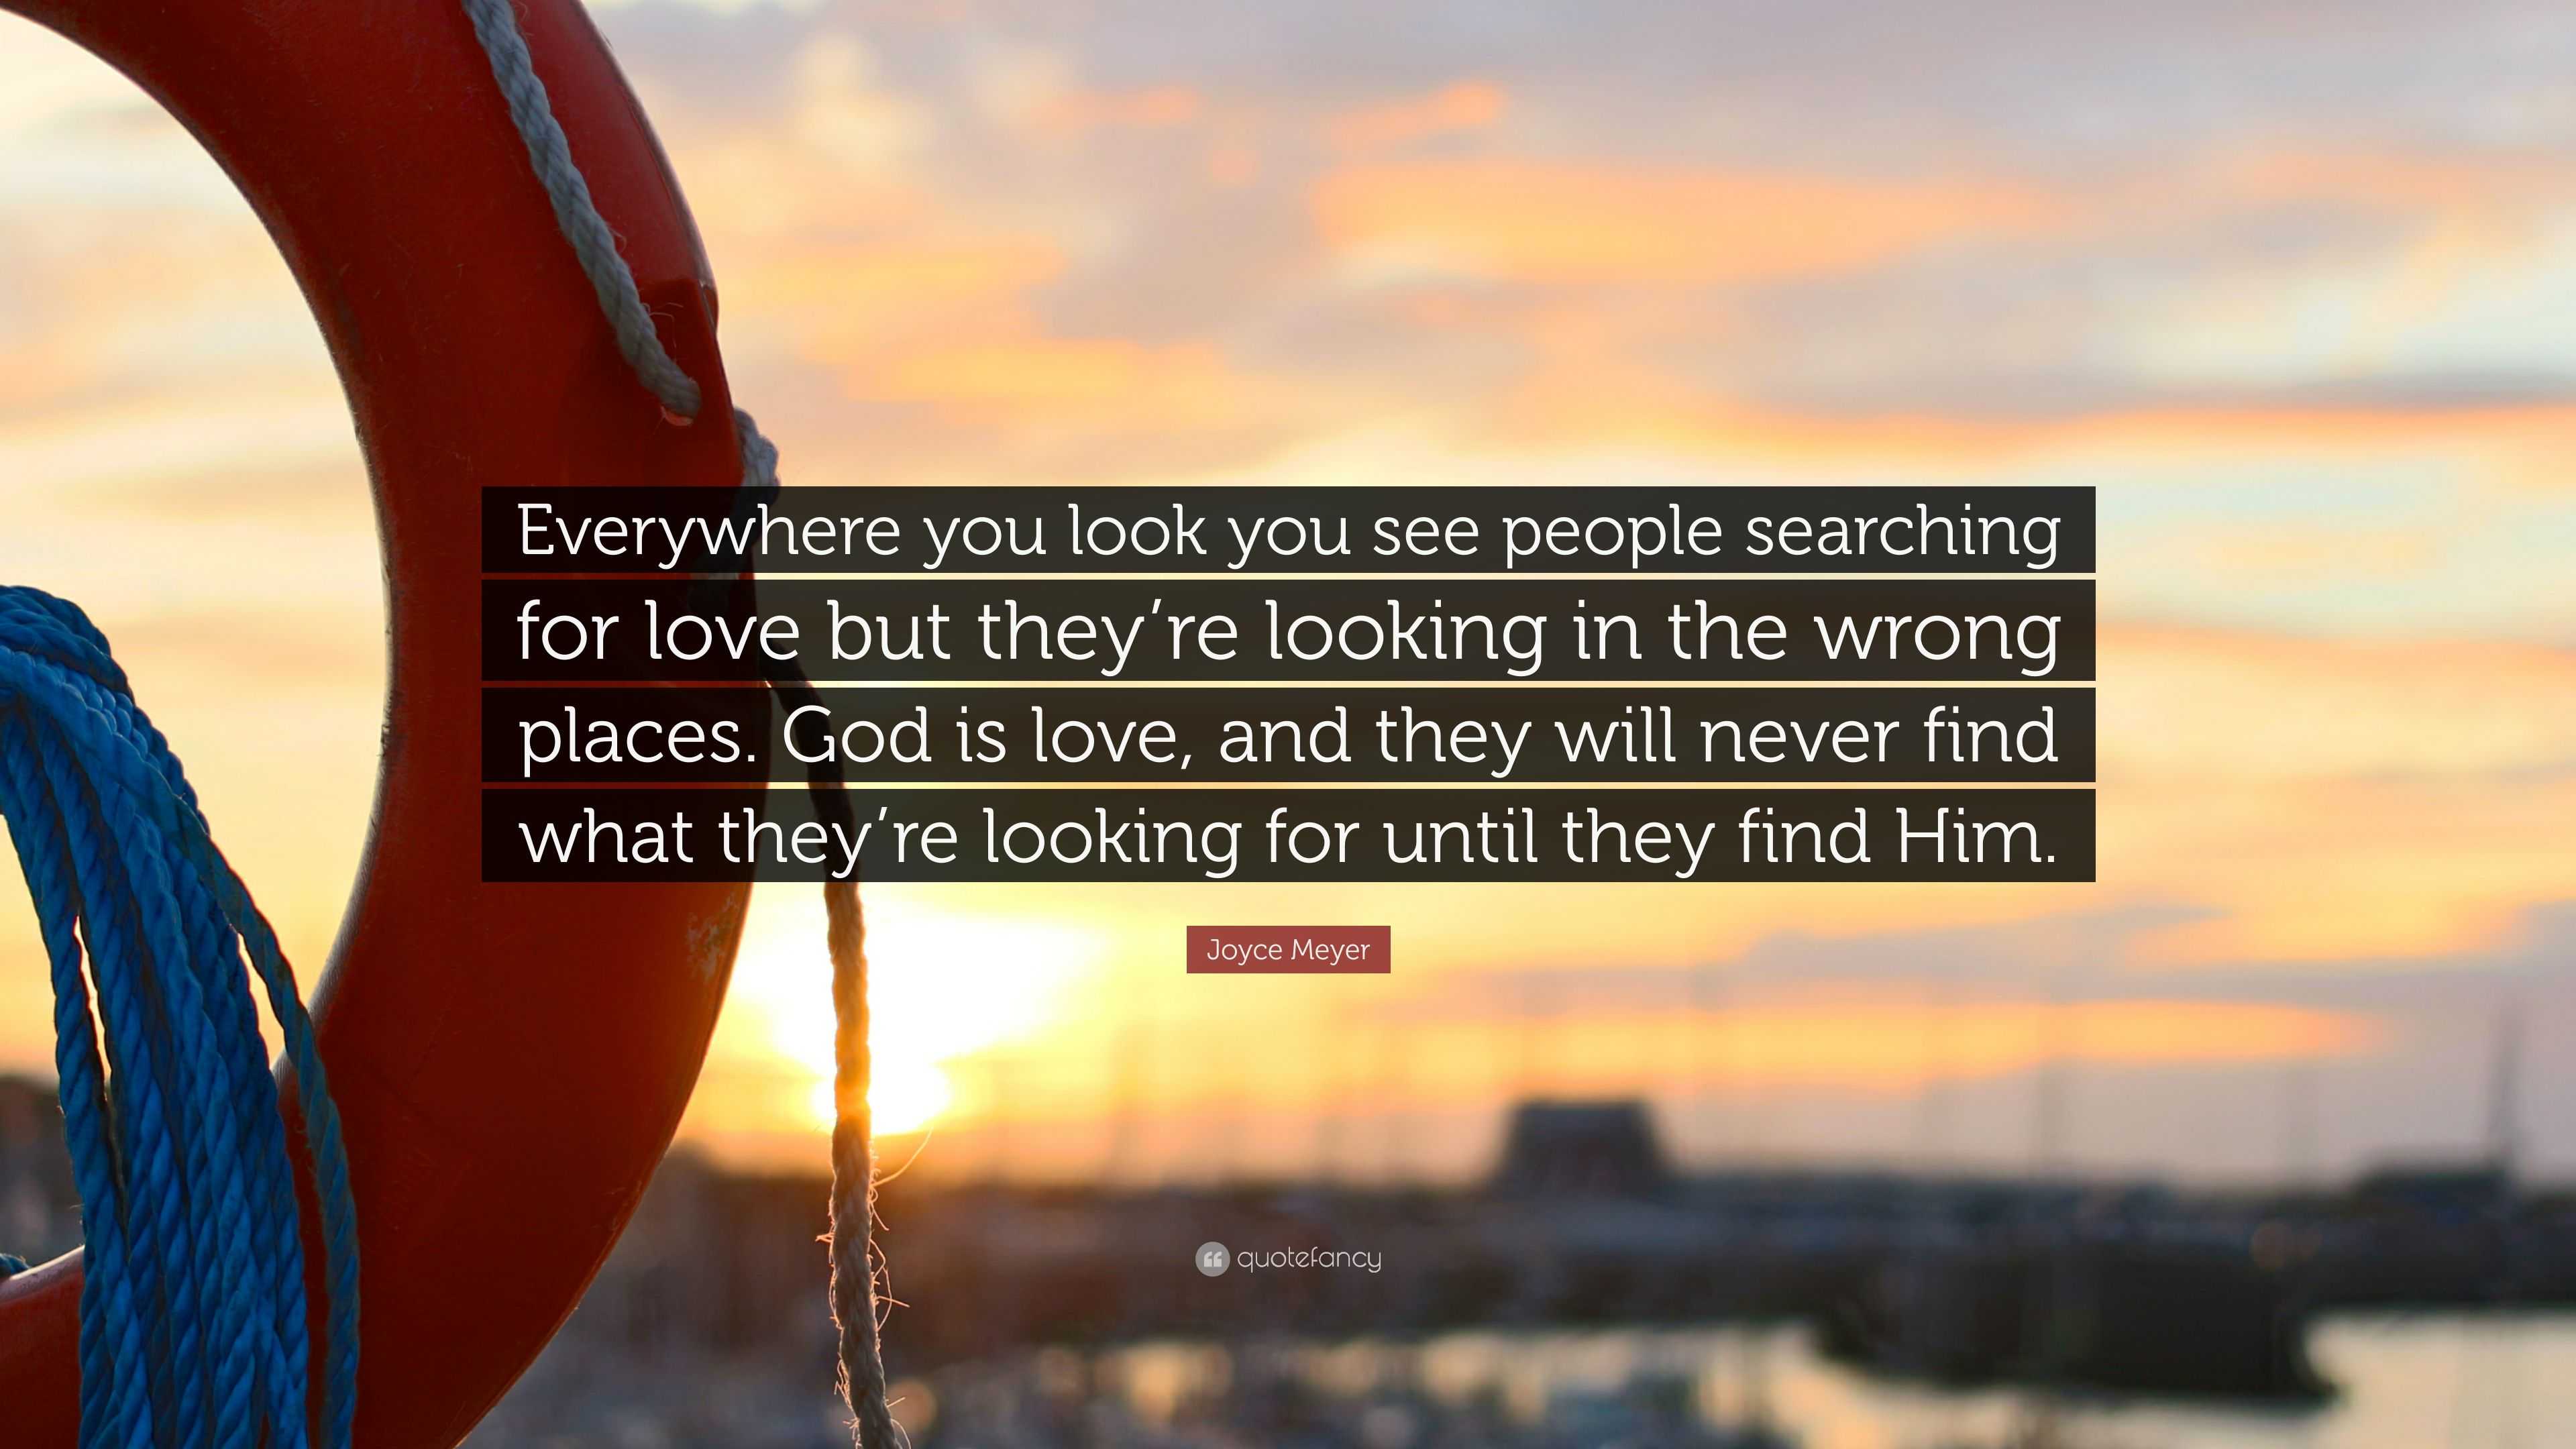 Joyce Meyer Quote: “Everywhere you look you see people searching for love  but they're looking in the wrong places. God is love, and they wil”